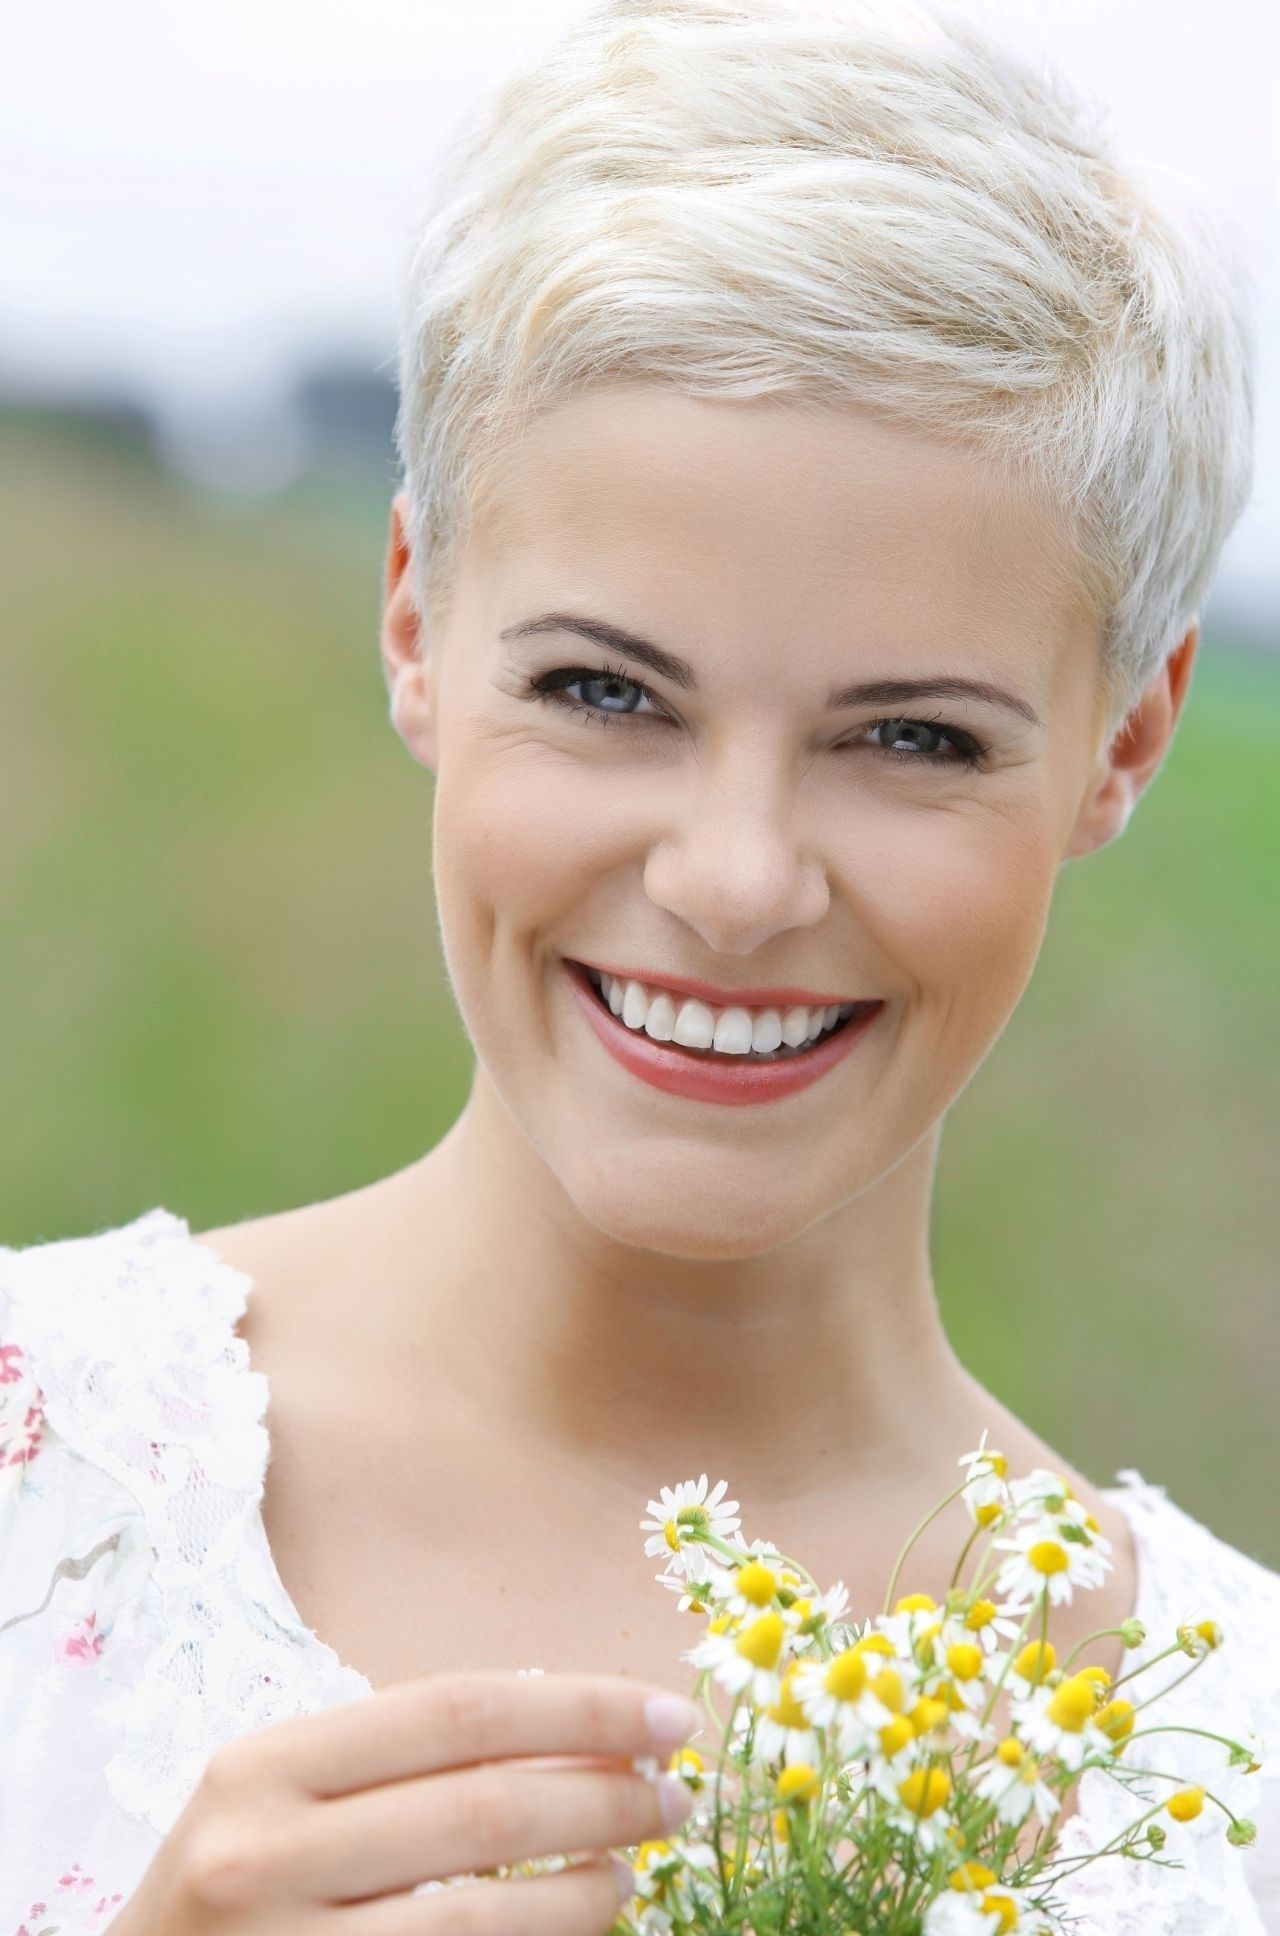 Short Pixie Haircut New Short Blonde Hairstyles Short Hairstyles Most Intended For Recent Very Short Pixie Hairstyles (View 9 of 15)